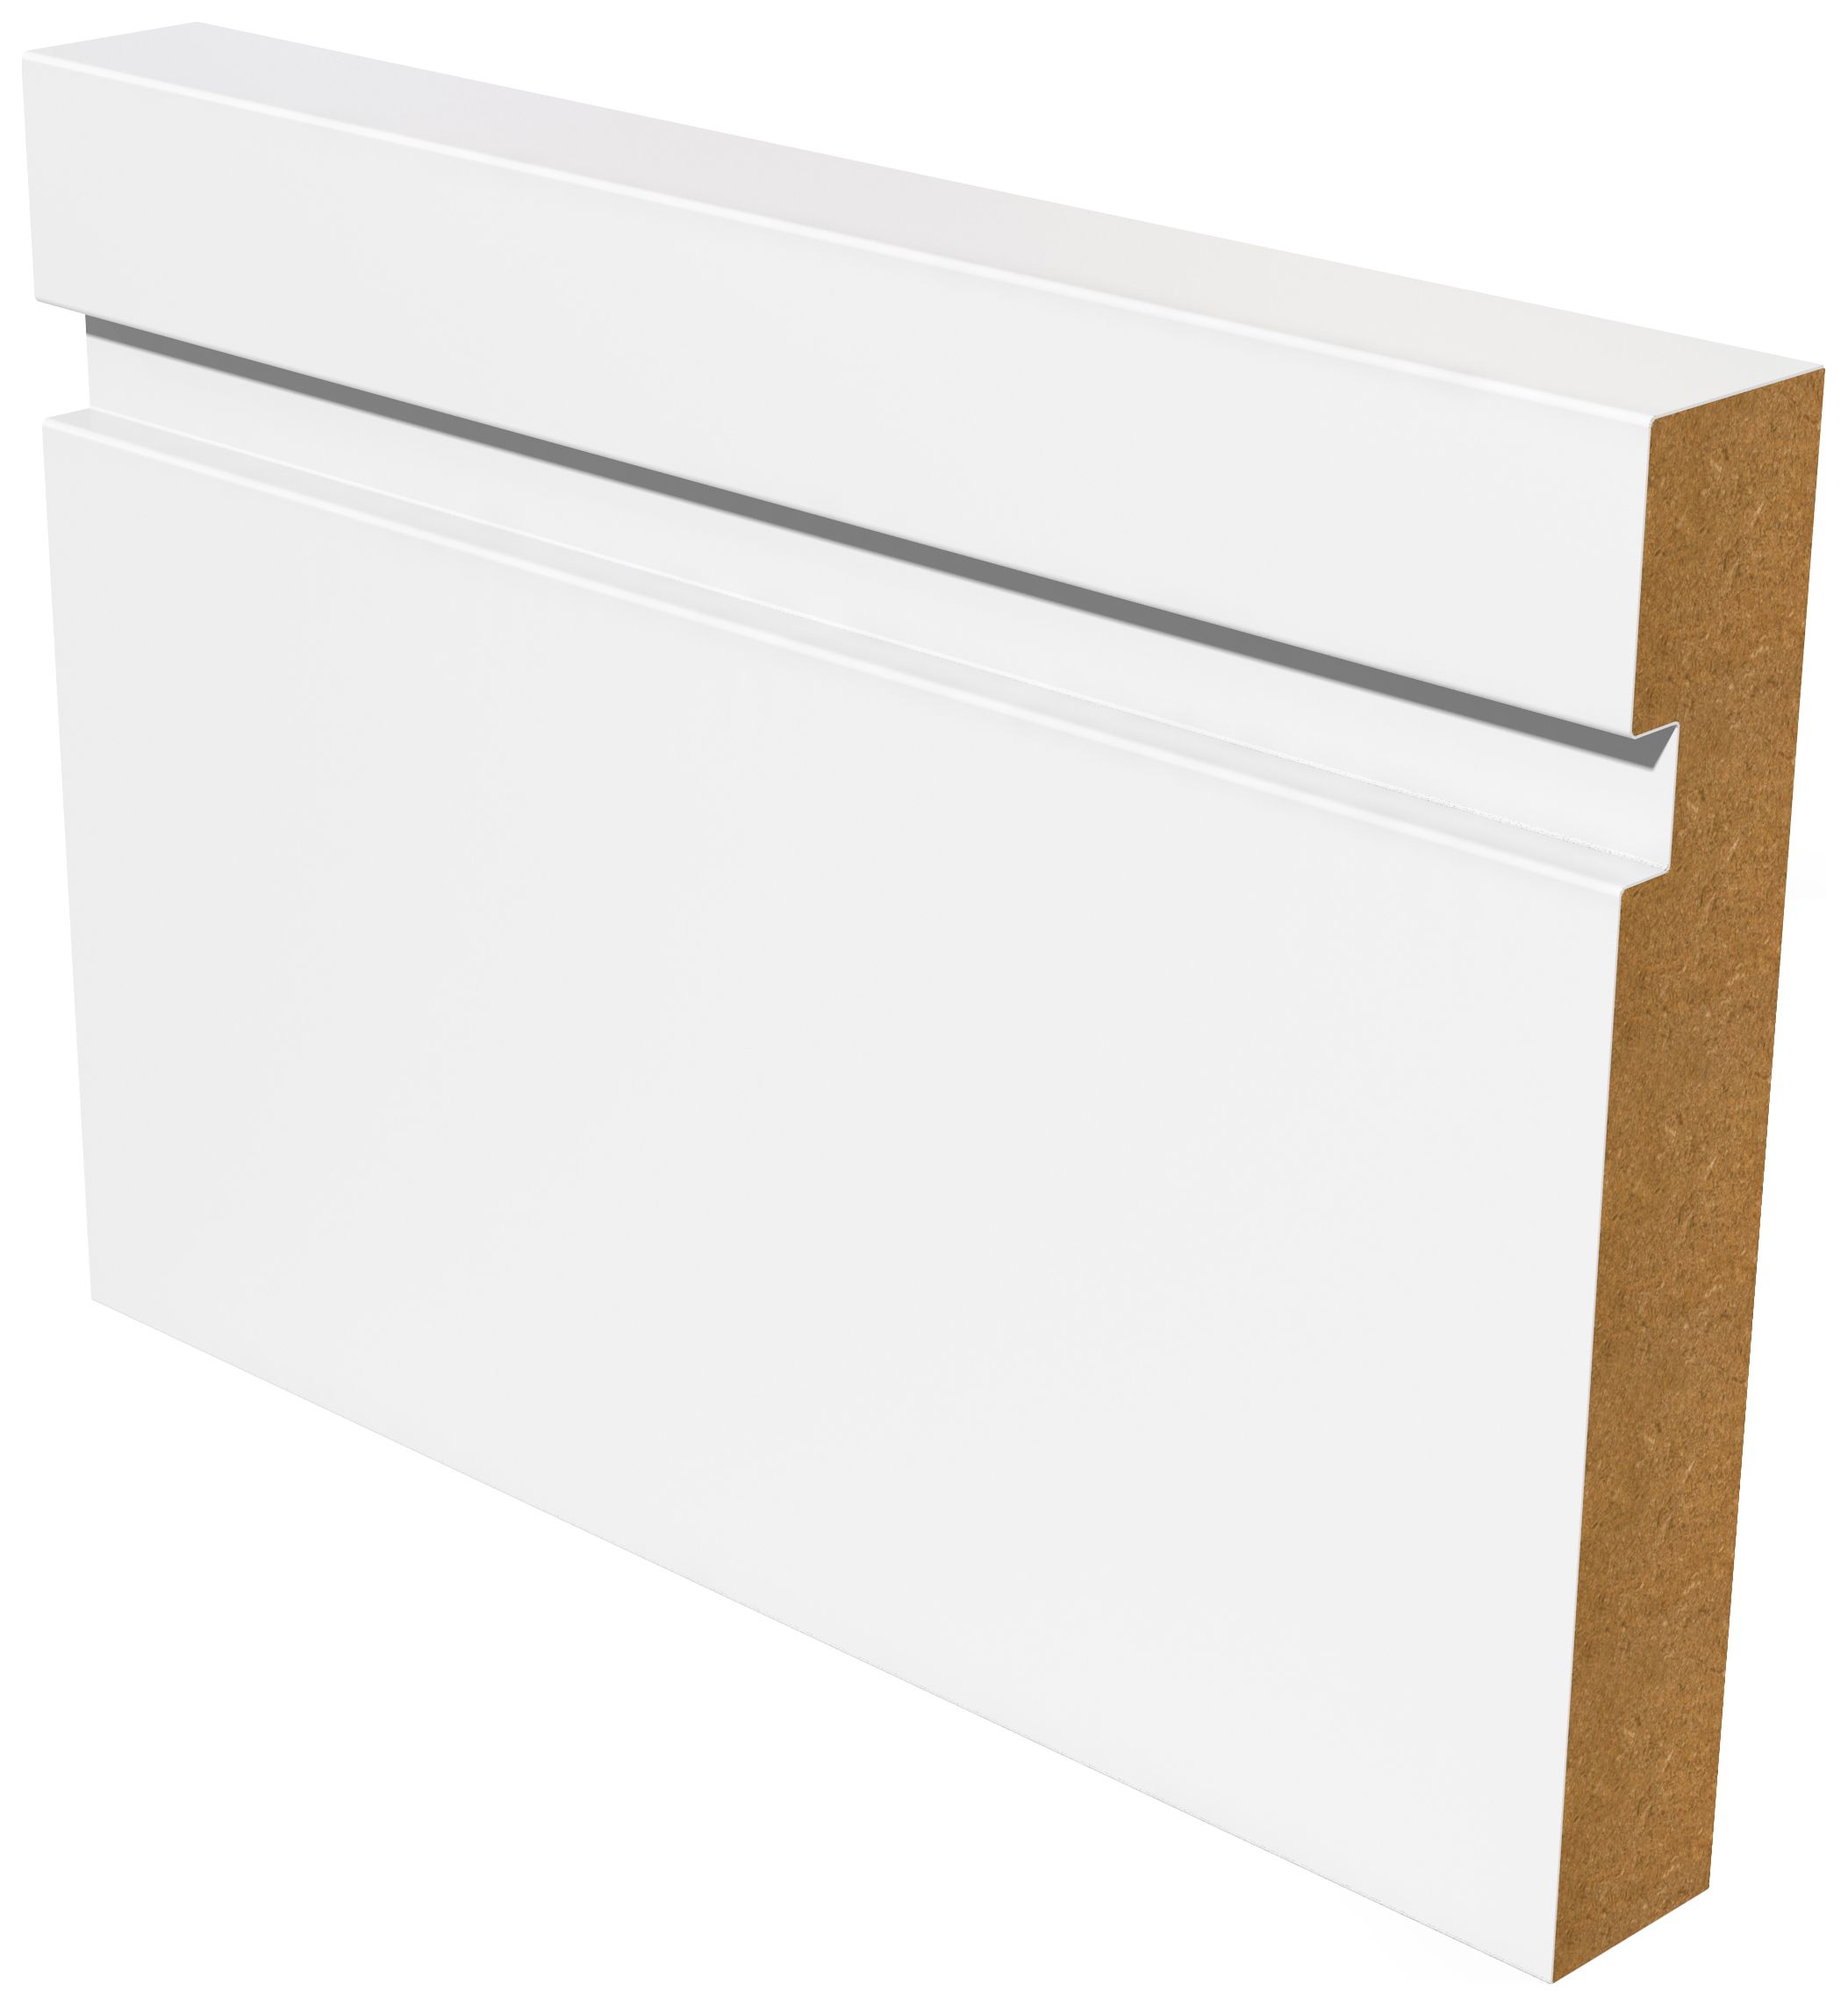 Image of Wickes Grooved Square Edge White MDF Skirting - 18 x 144 x 4200mm